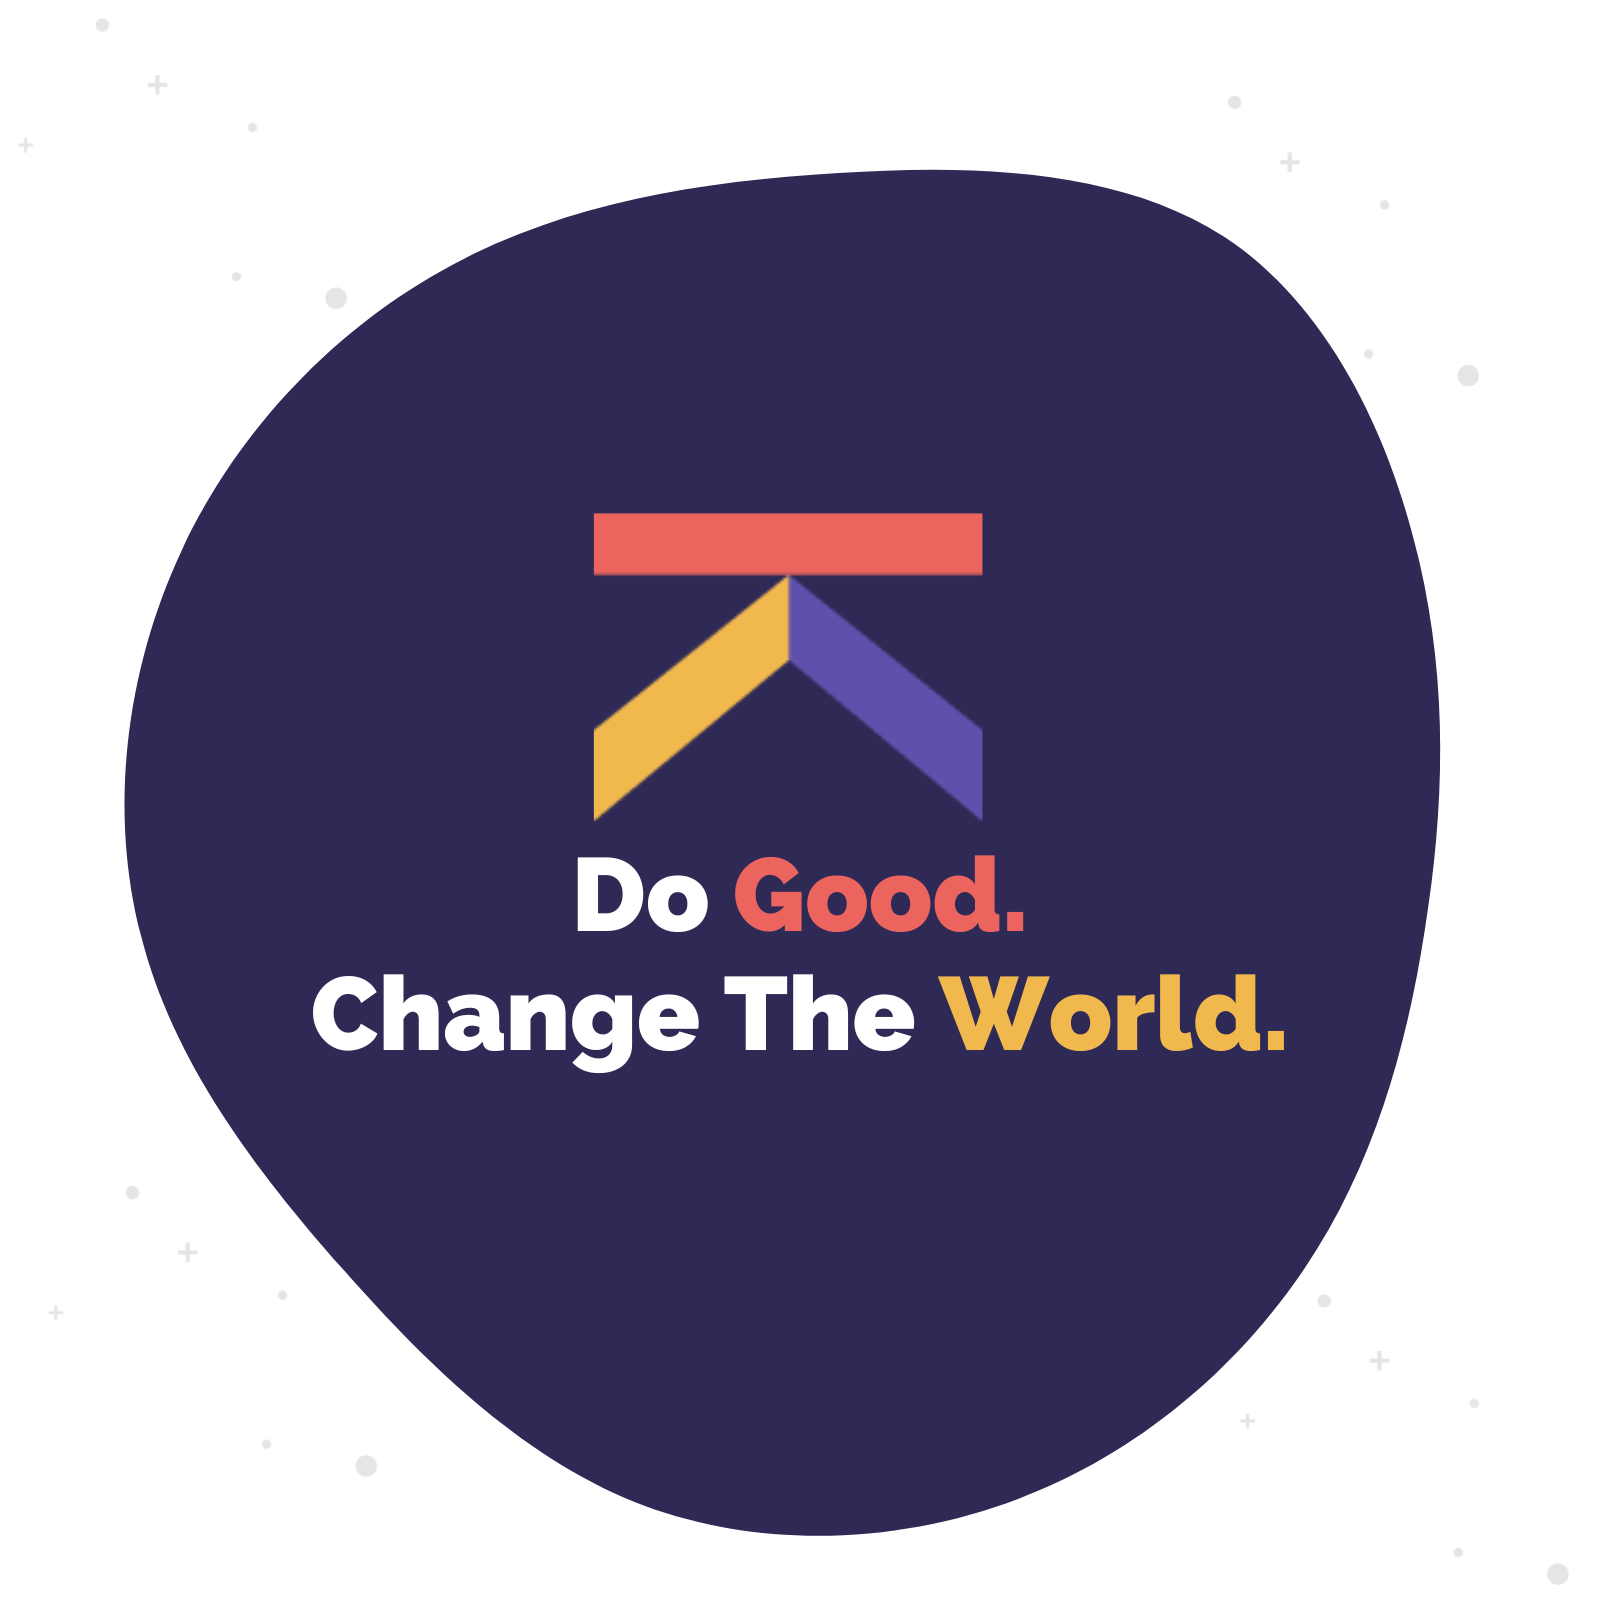 This image shows a dark purple blob and in it, text reads, "Do Good. Change The World."